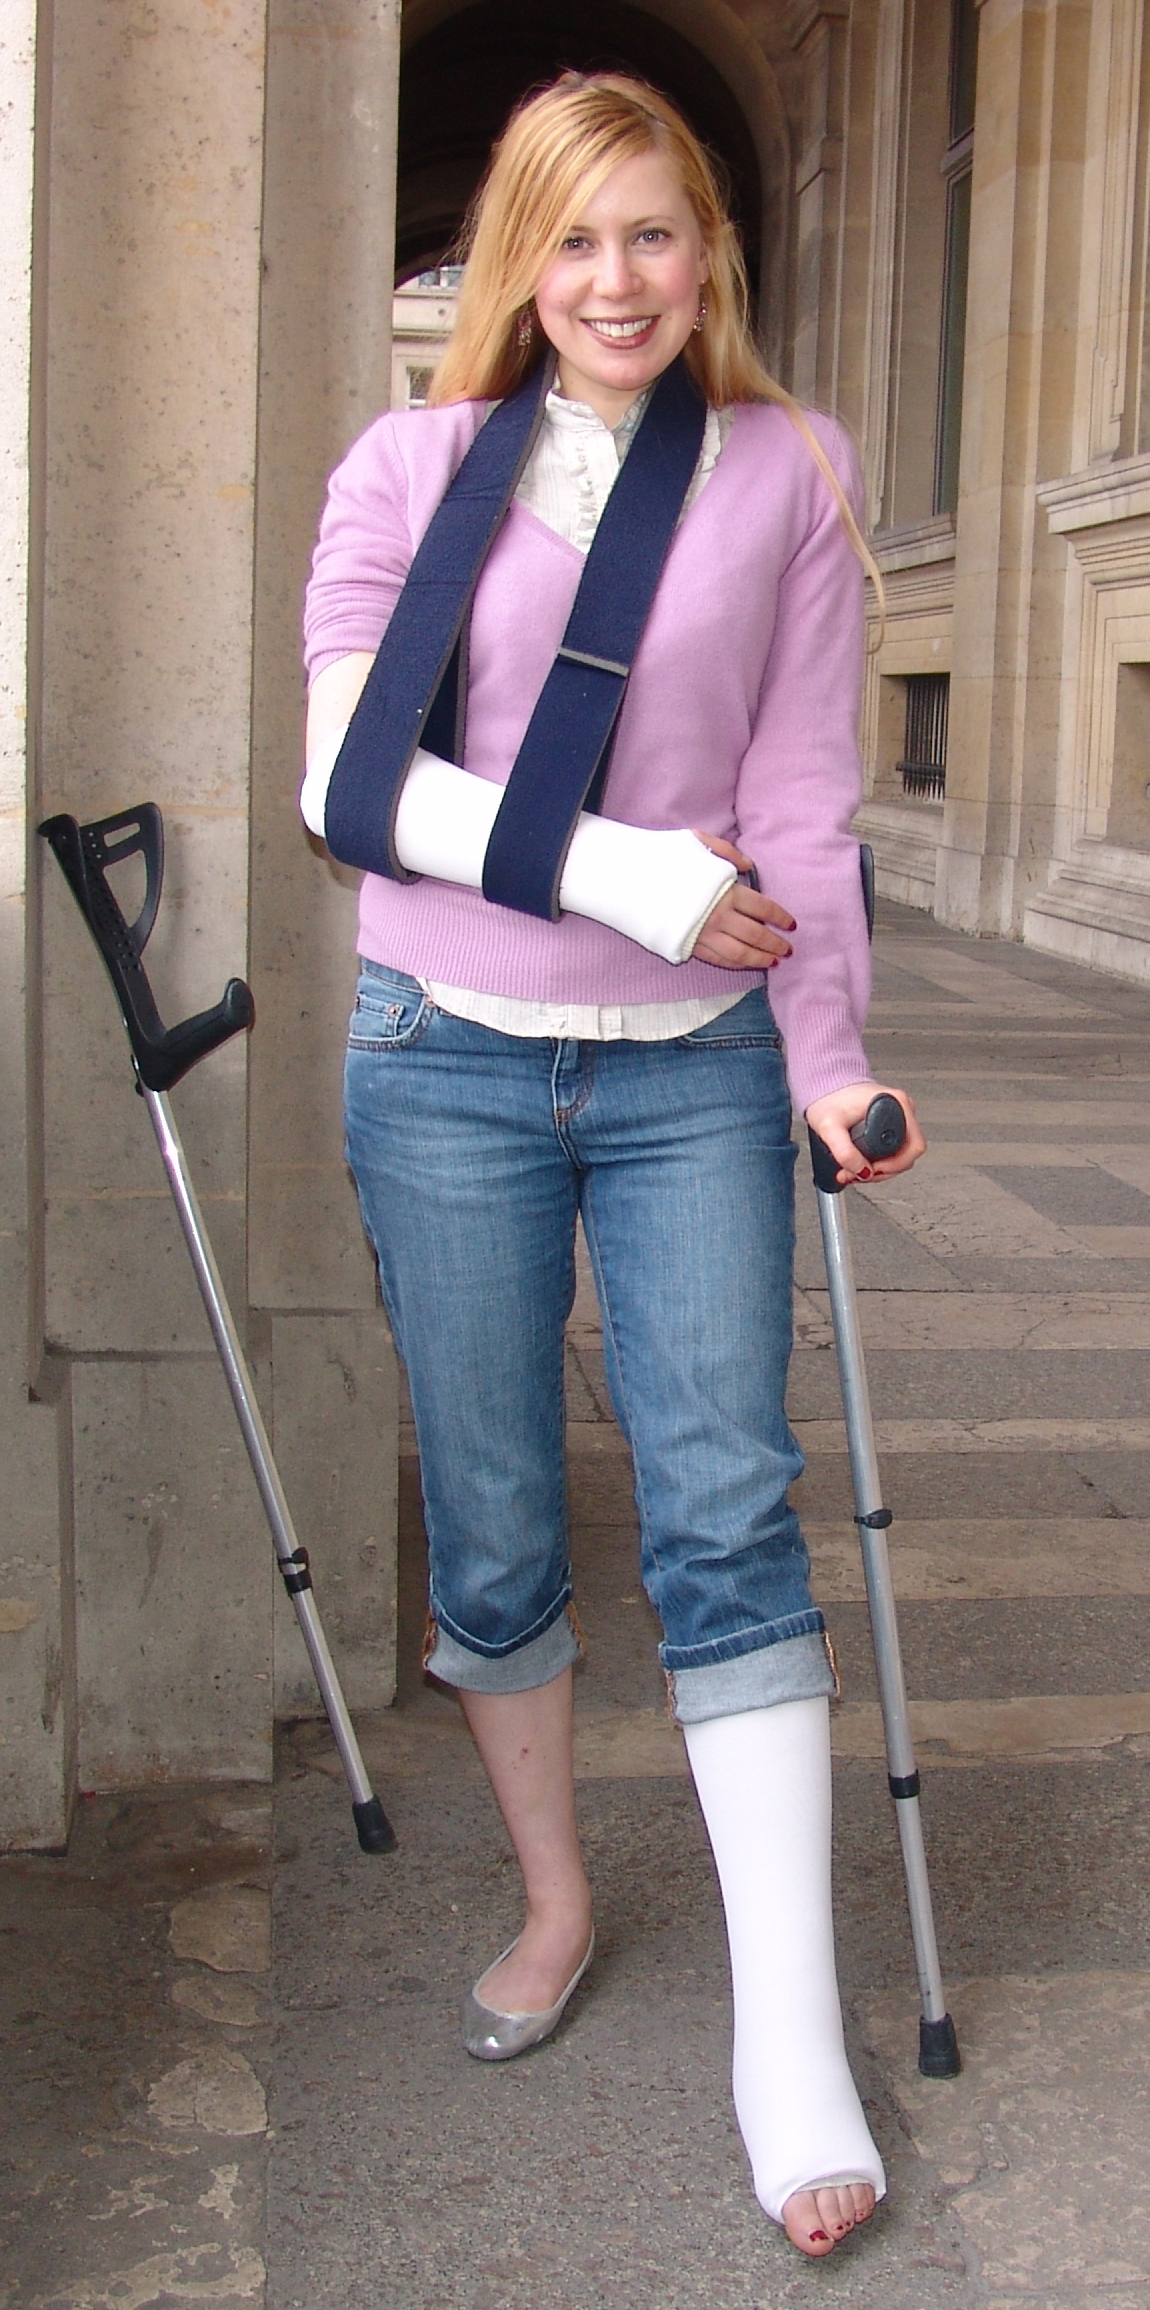 Pretty women with cast and crutches